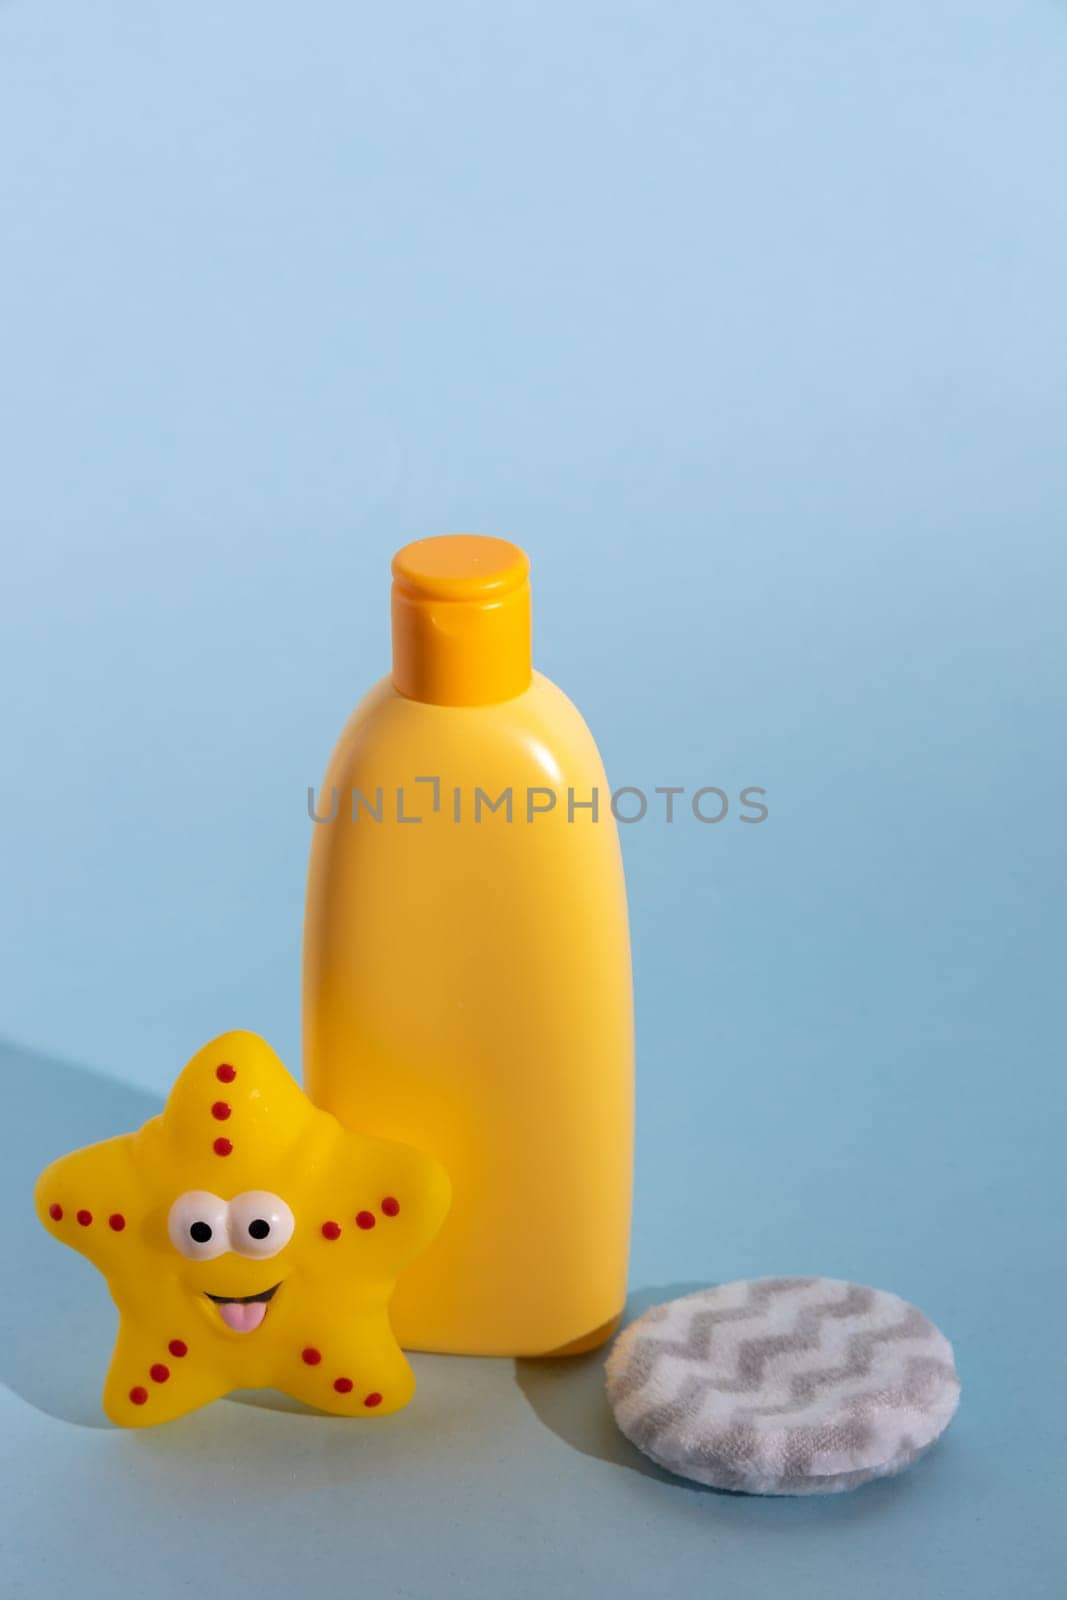 An empty yellow bottle of baby soap or washing gel and cleansing sponge. Accessories above blue background. Template for design. by Ri6ka